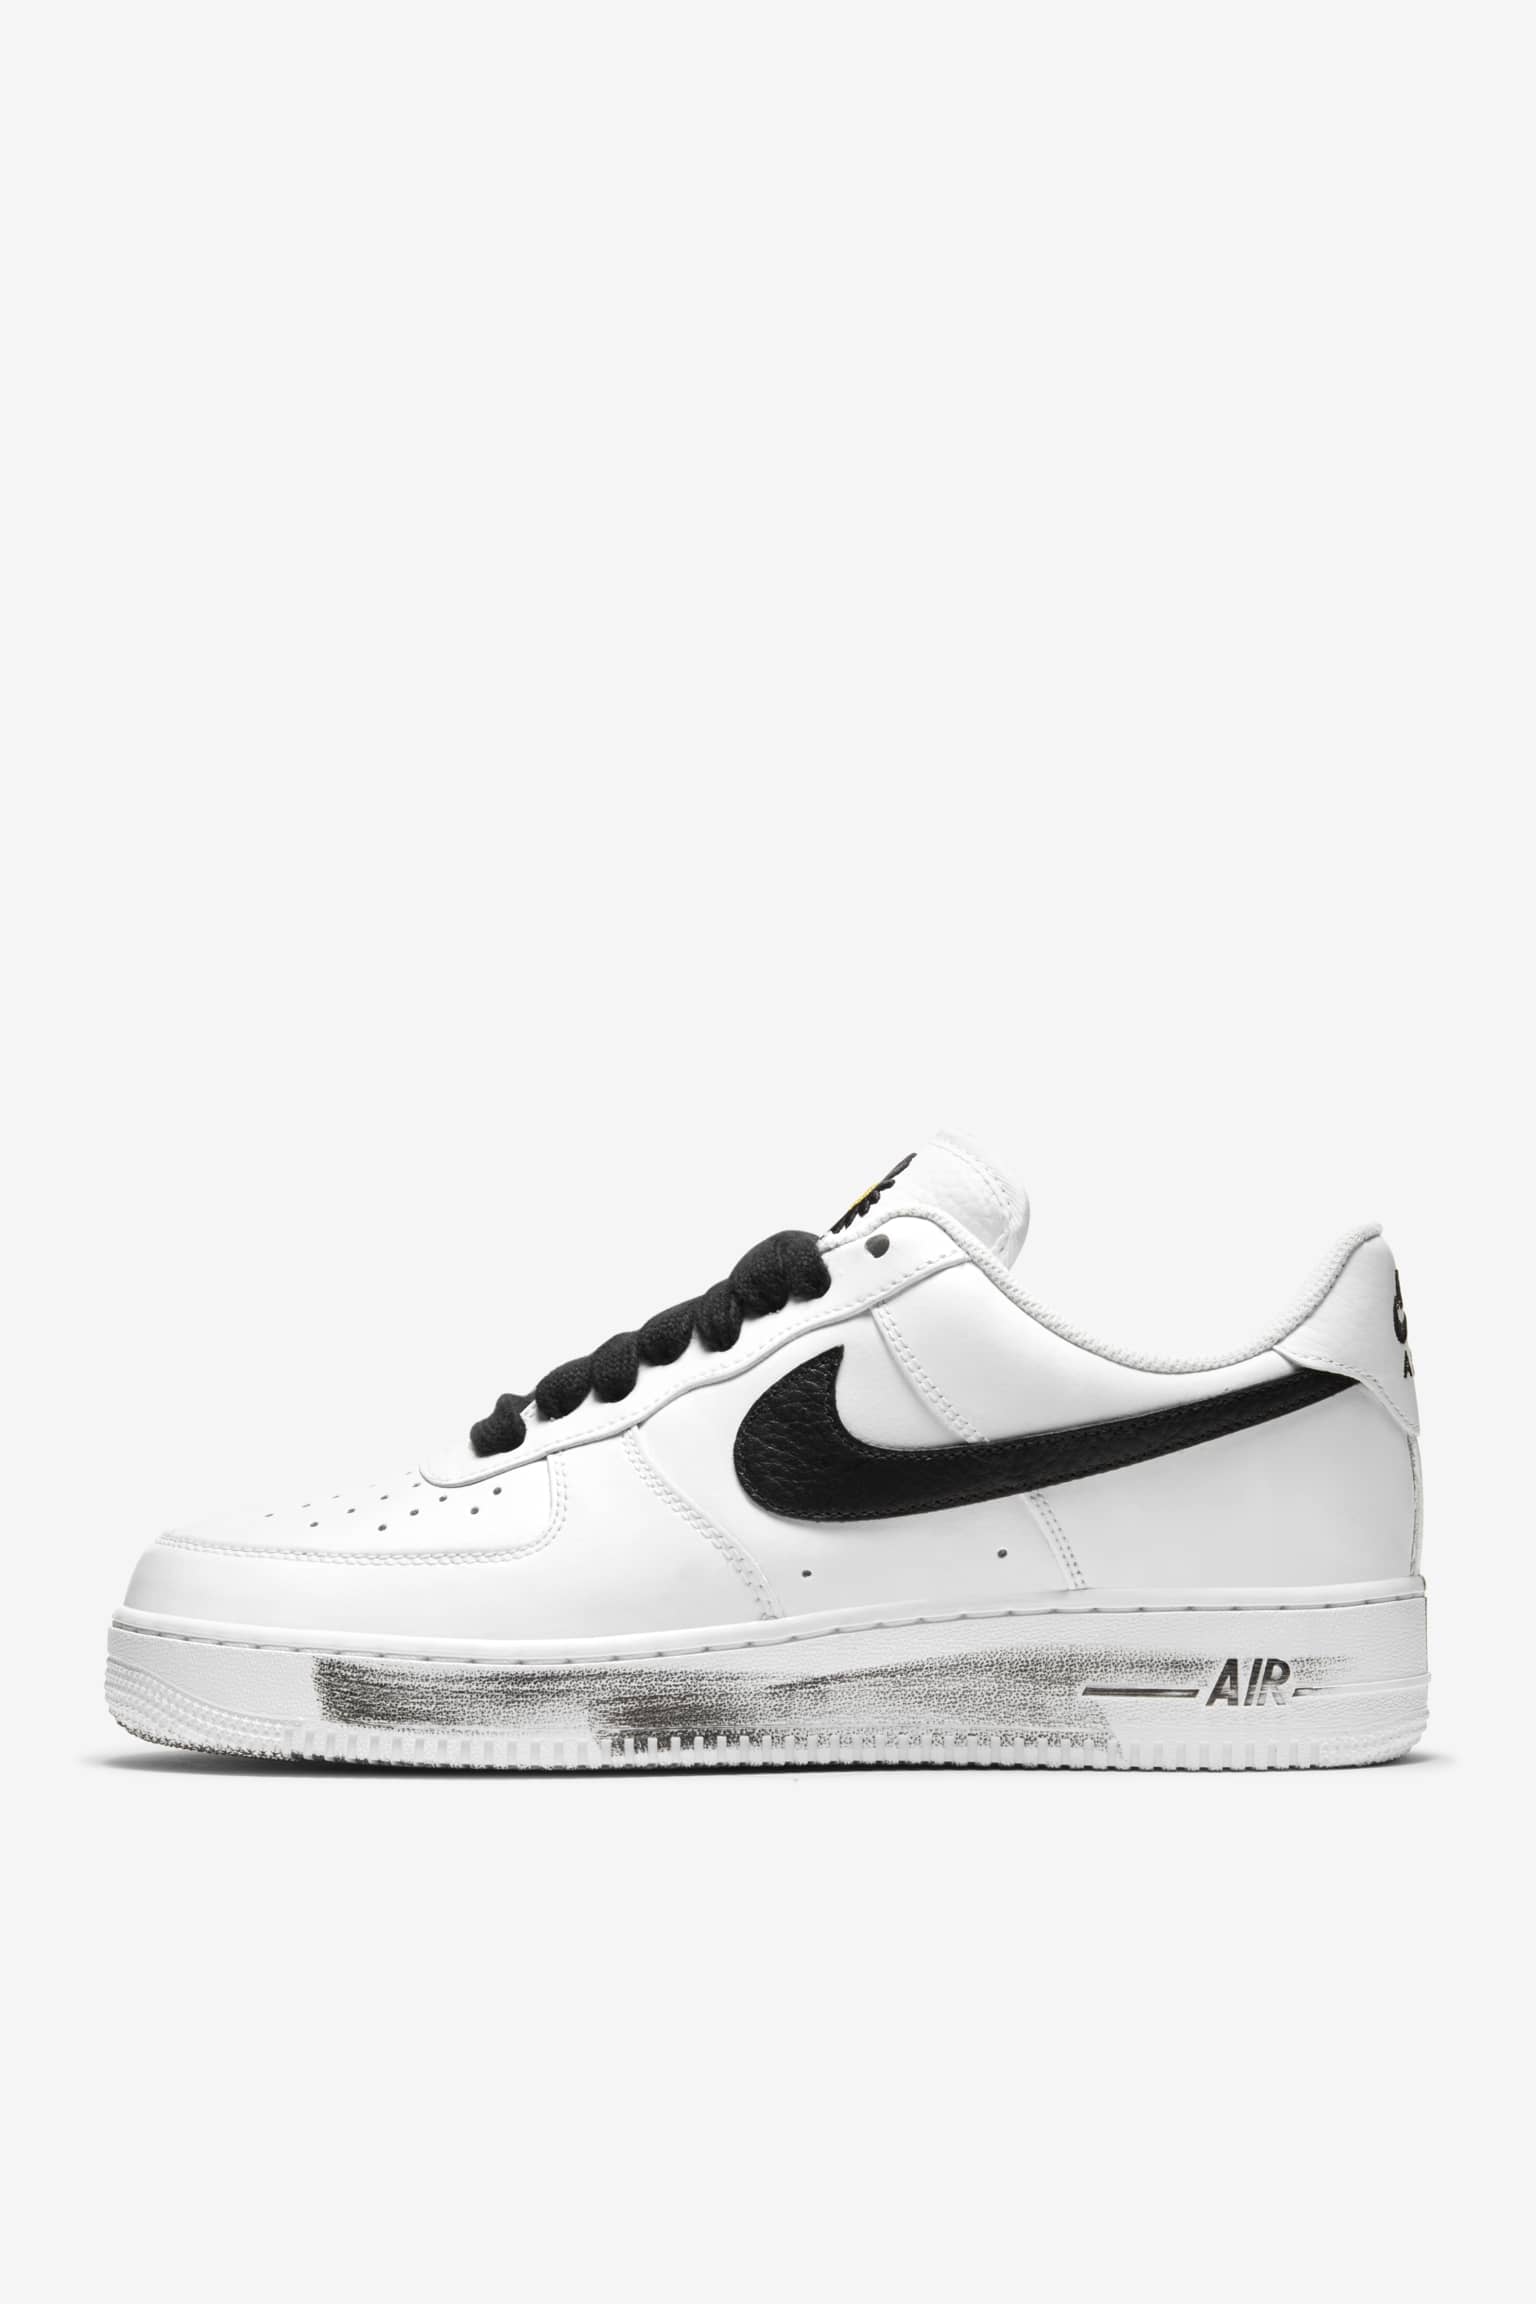 air force 1 nere e grige